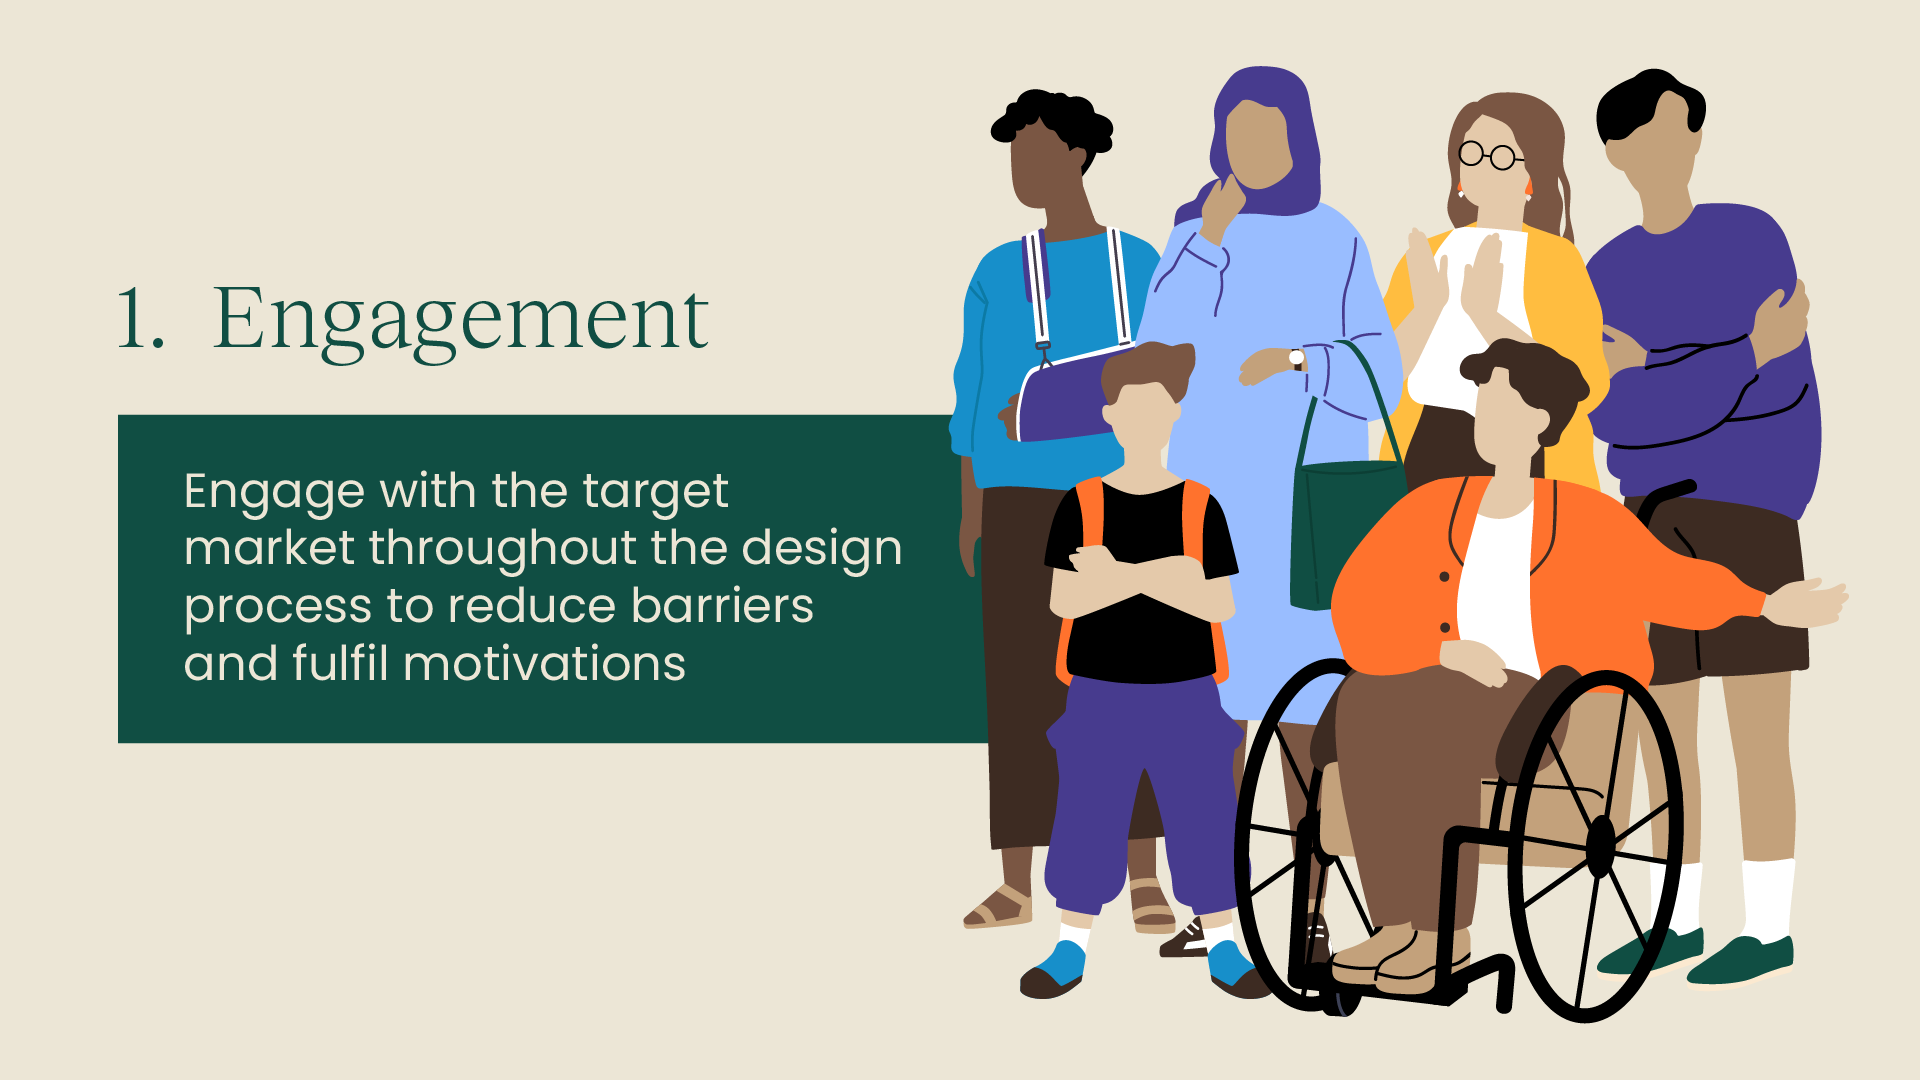 1. Engagement: Engage with the target market throughout the design process to reduce barriers and fulfil motivations